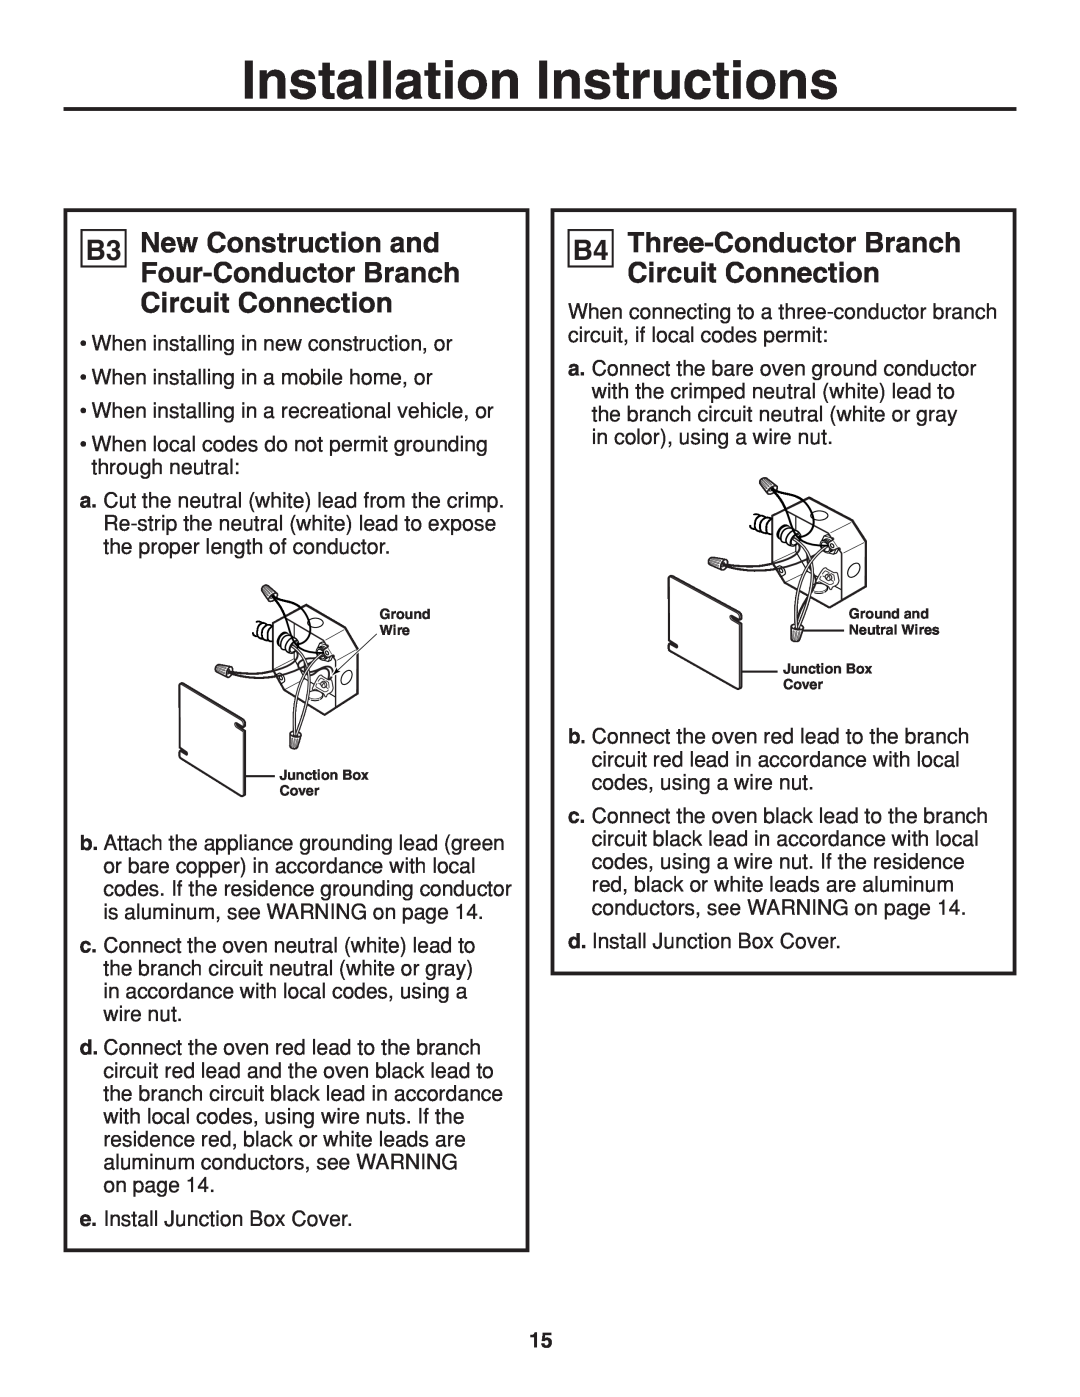 GE r08654v-1 B3 New Construction and Four-Conductor Branch Circuit Connection, Installation Instructions 